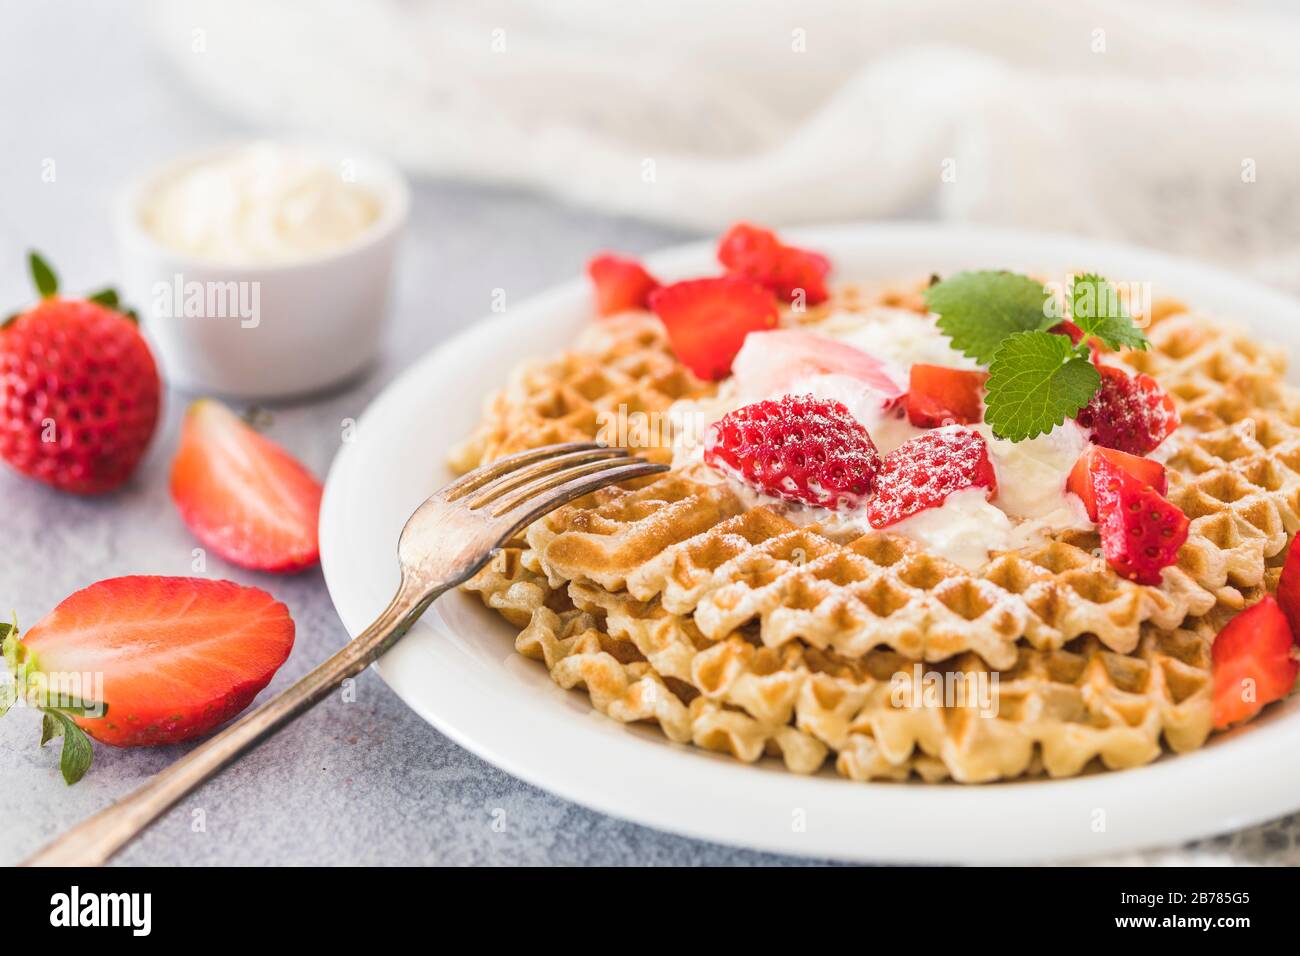 Swedish waffles with strawberries and whipped cream in a small bowl in the background. Next to the plate is a fork and whole and halved strawberries. Stock Photo